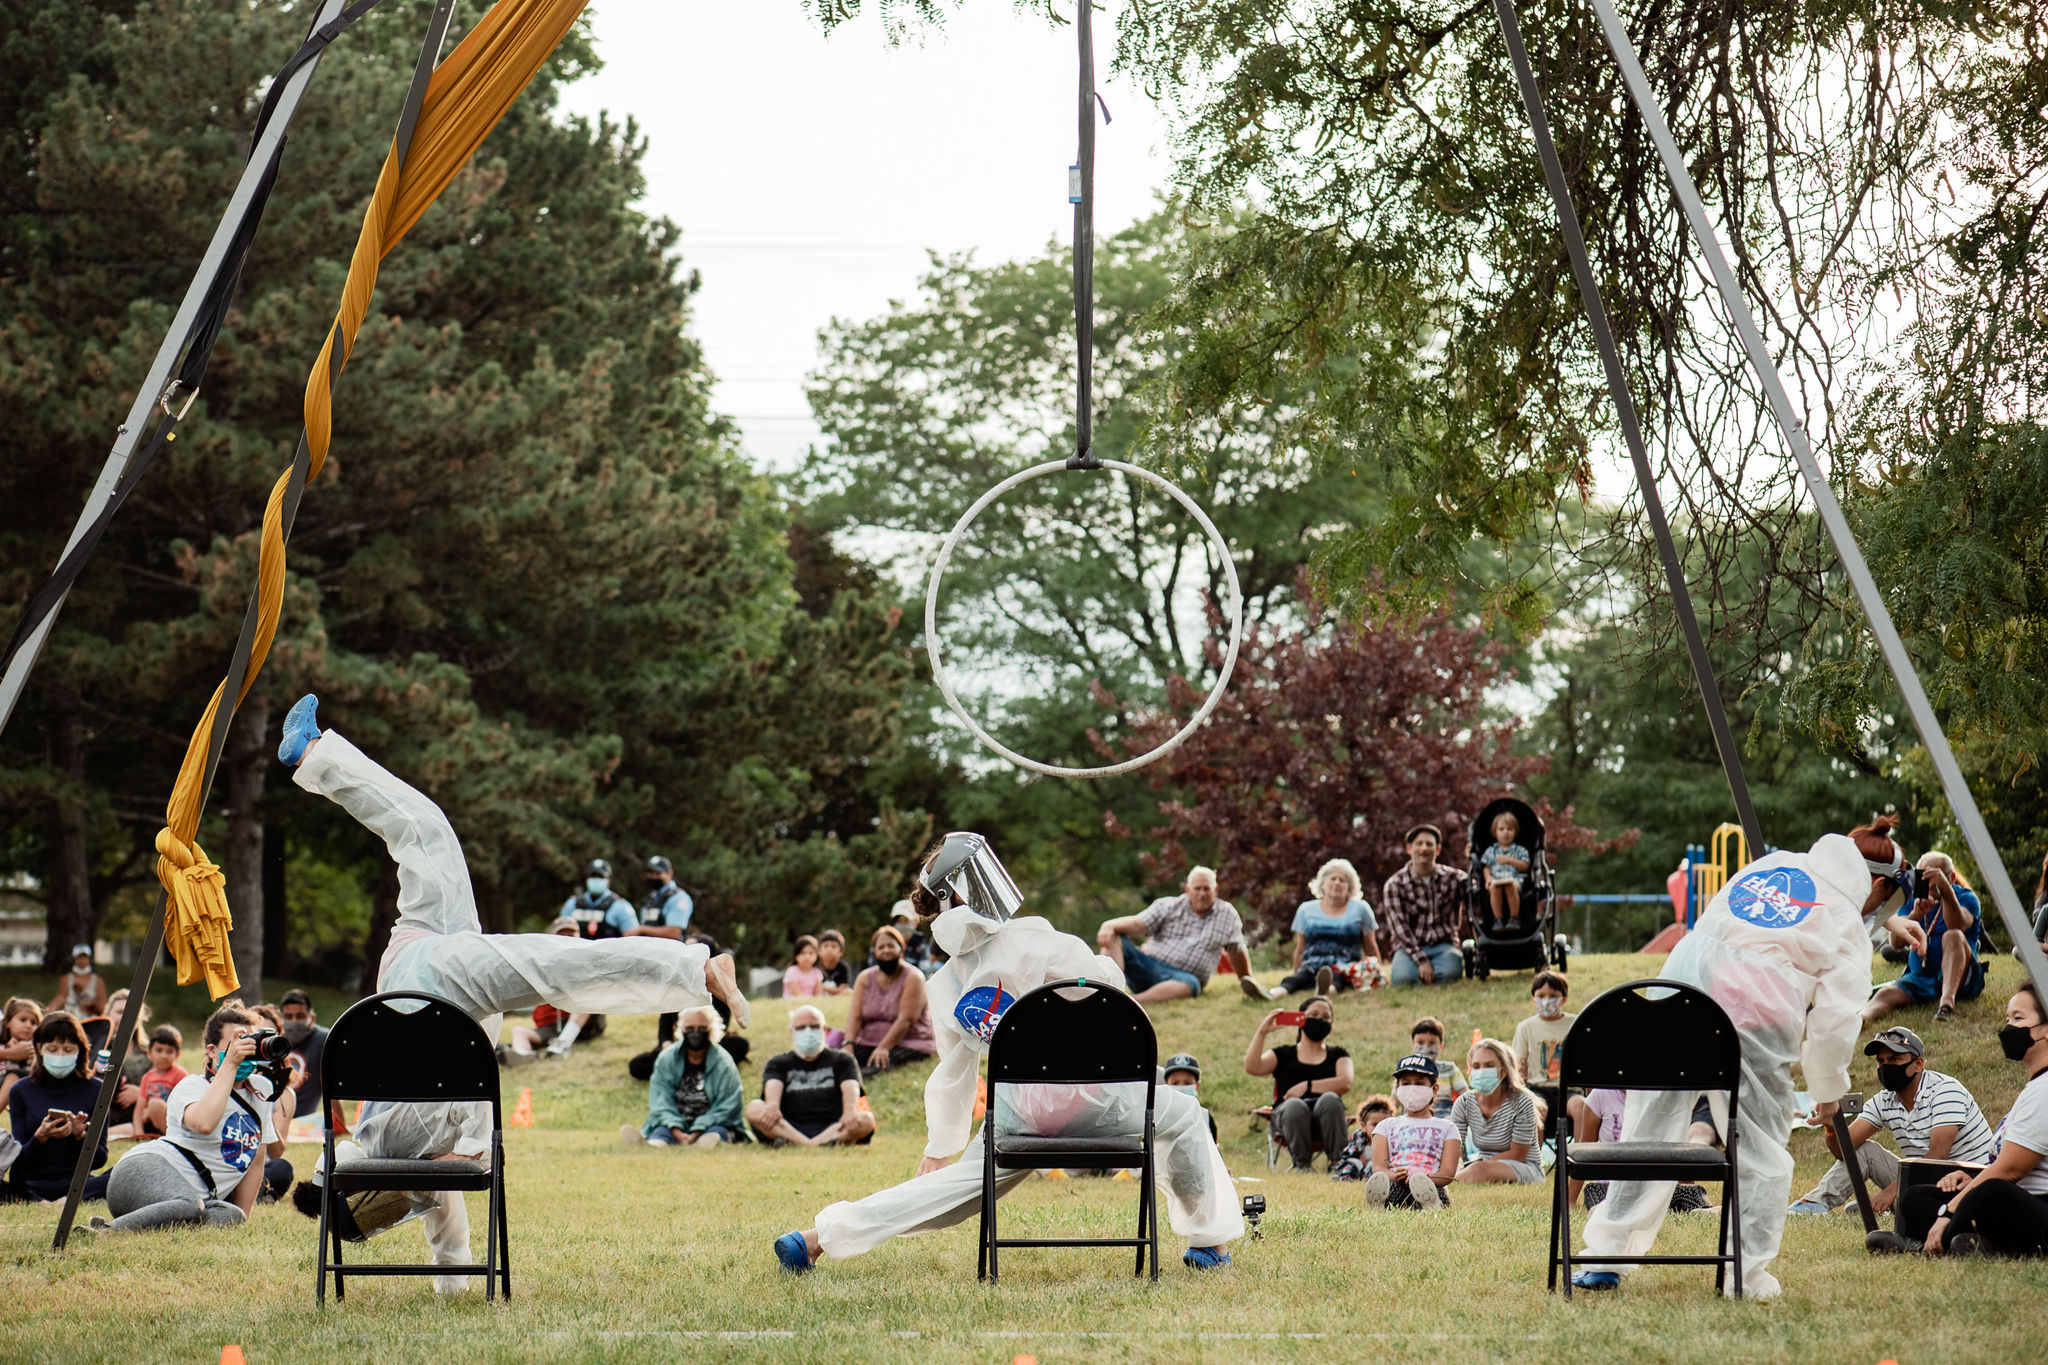 Three performers in white space suits dance on chairs while audience members watch from the grass.